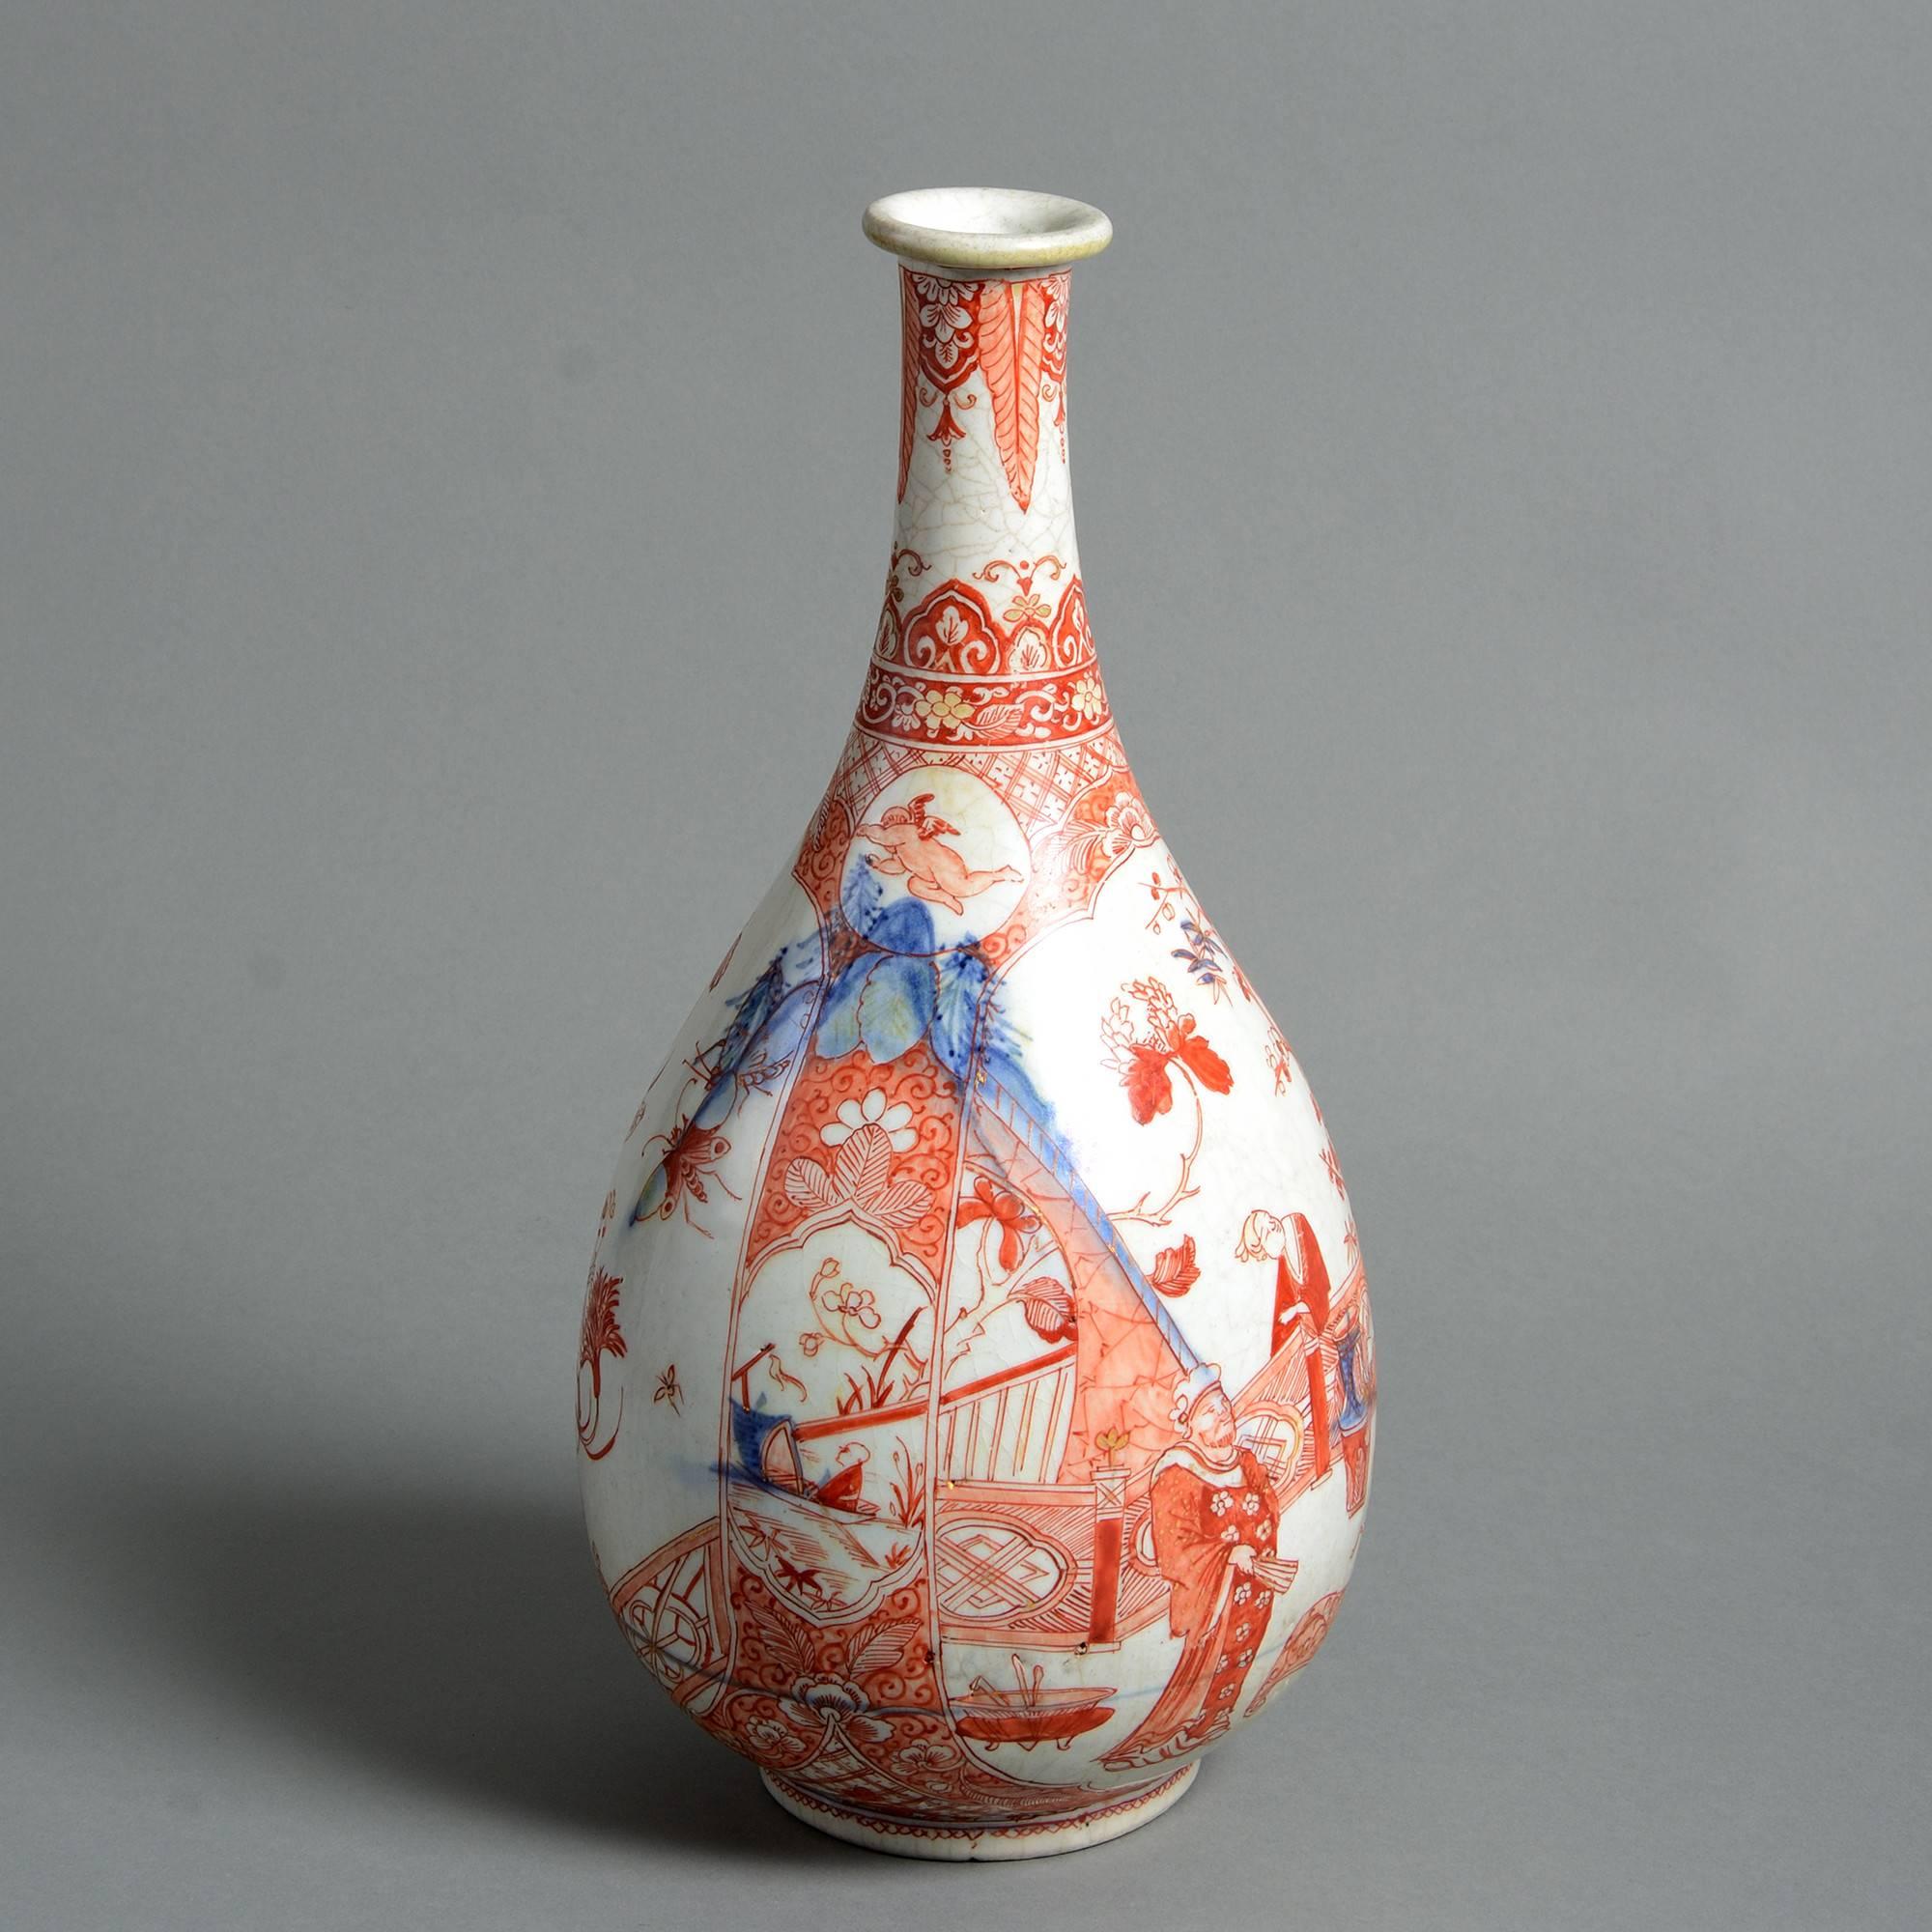 A rare late 17th century clobbered Arita porcelain bottle vase, having decoration in later applied red upon a blue and white glazed body. 

Edo period.